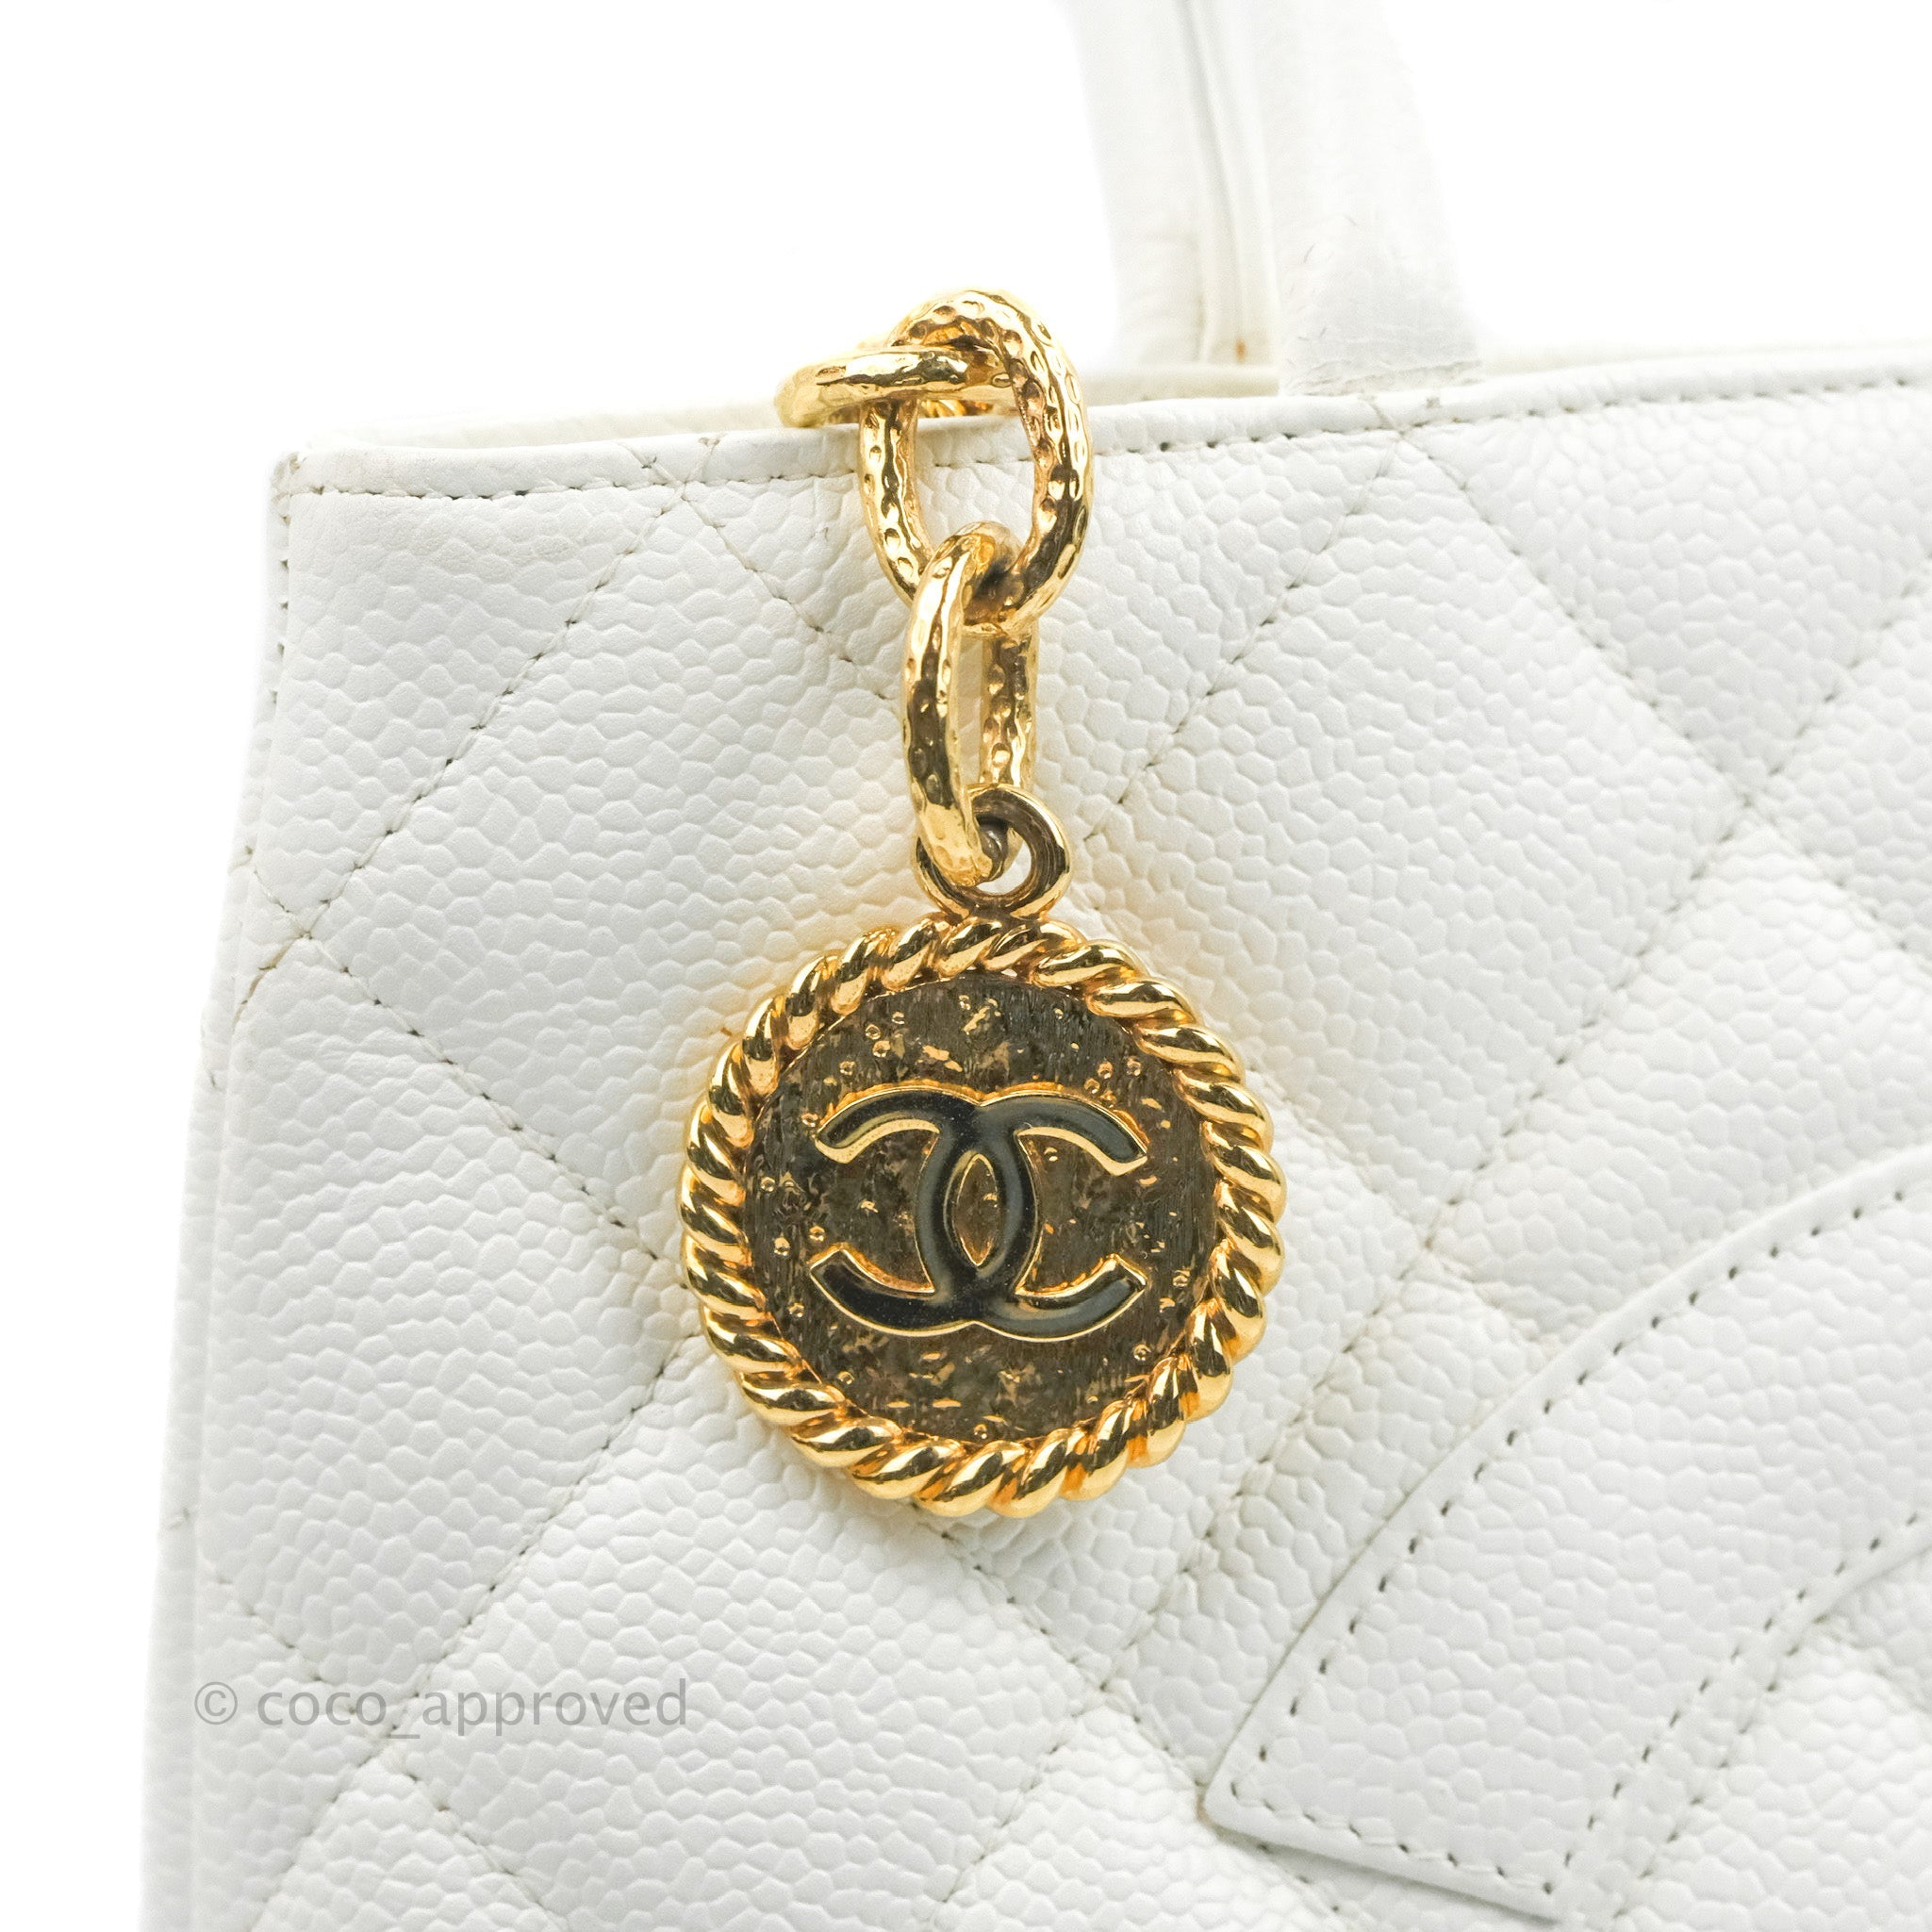 CHANEL Medallion Tote Bags for Women, Authenticity Guaranteed